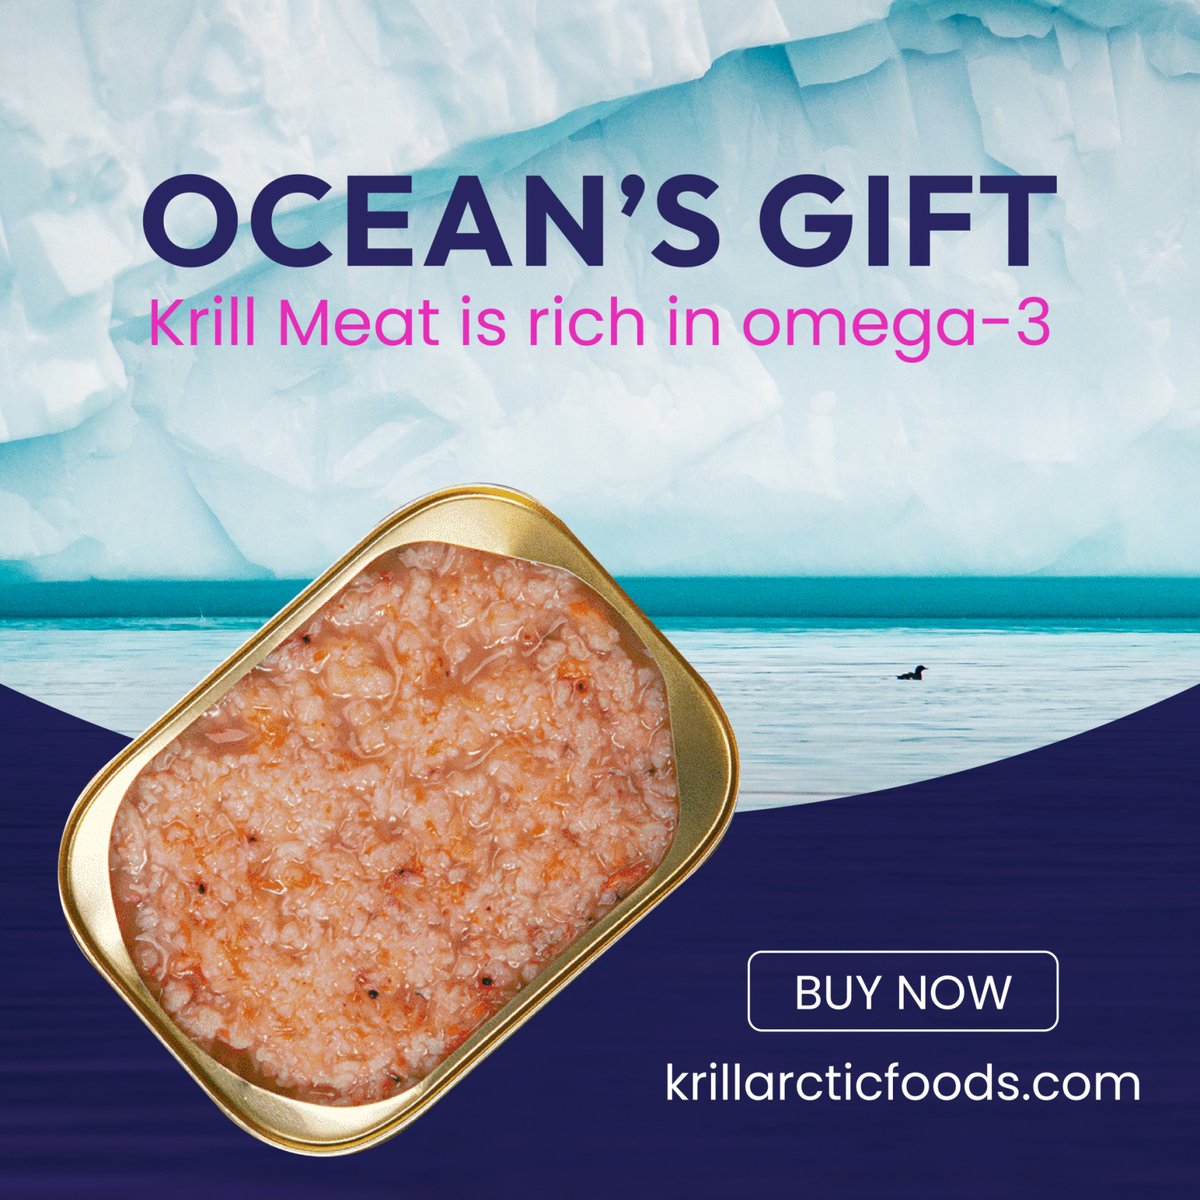 Dive into the depths of nutrition with our ocean's gift: Krill meat, the omega-3 powerhouse! 🌊🦐 Packed with health benefits, this is a must-try for wellness enthusiasts. #KrillMeat #Omega3 #NutritionBoost #HealthyEating #Wellness #Superfood